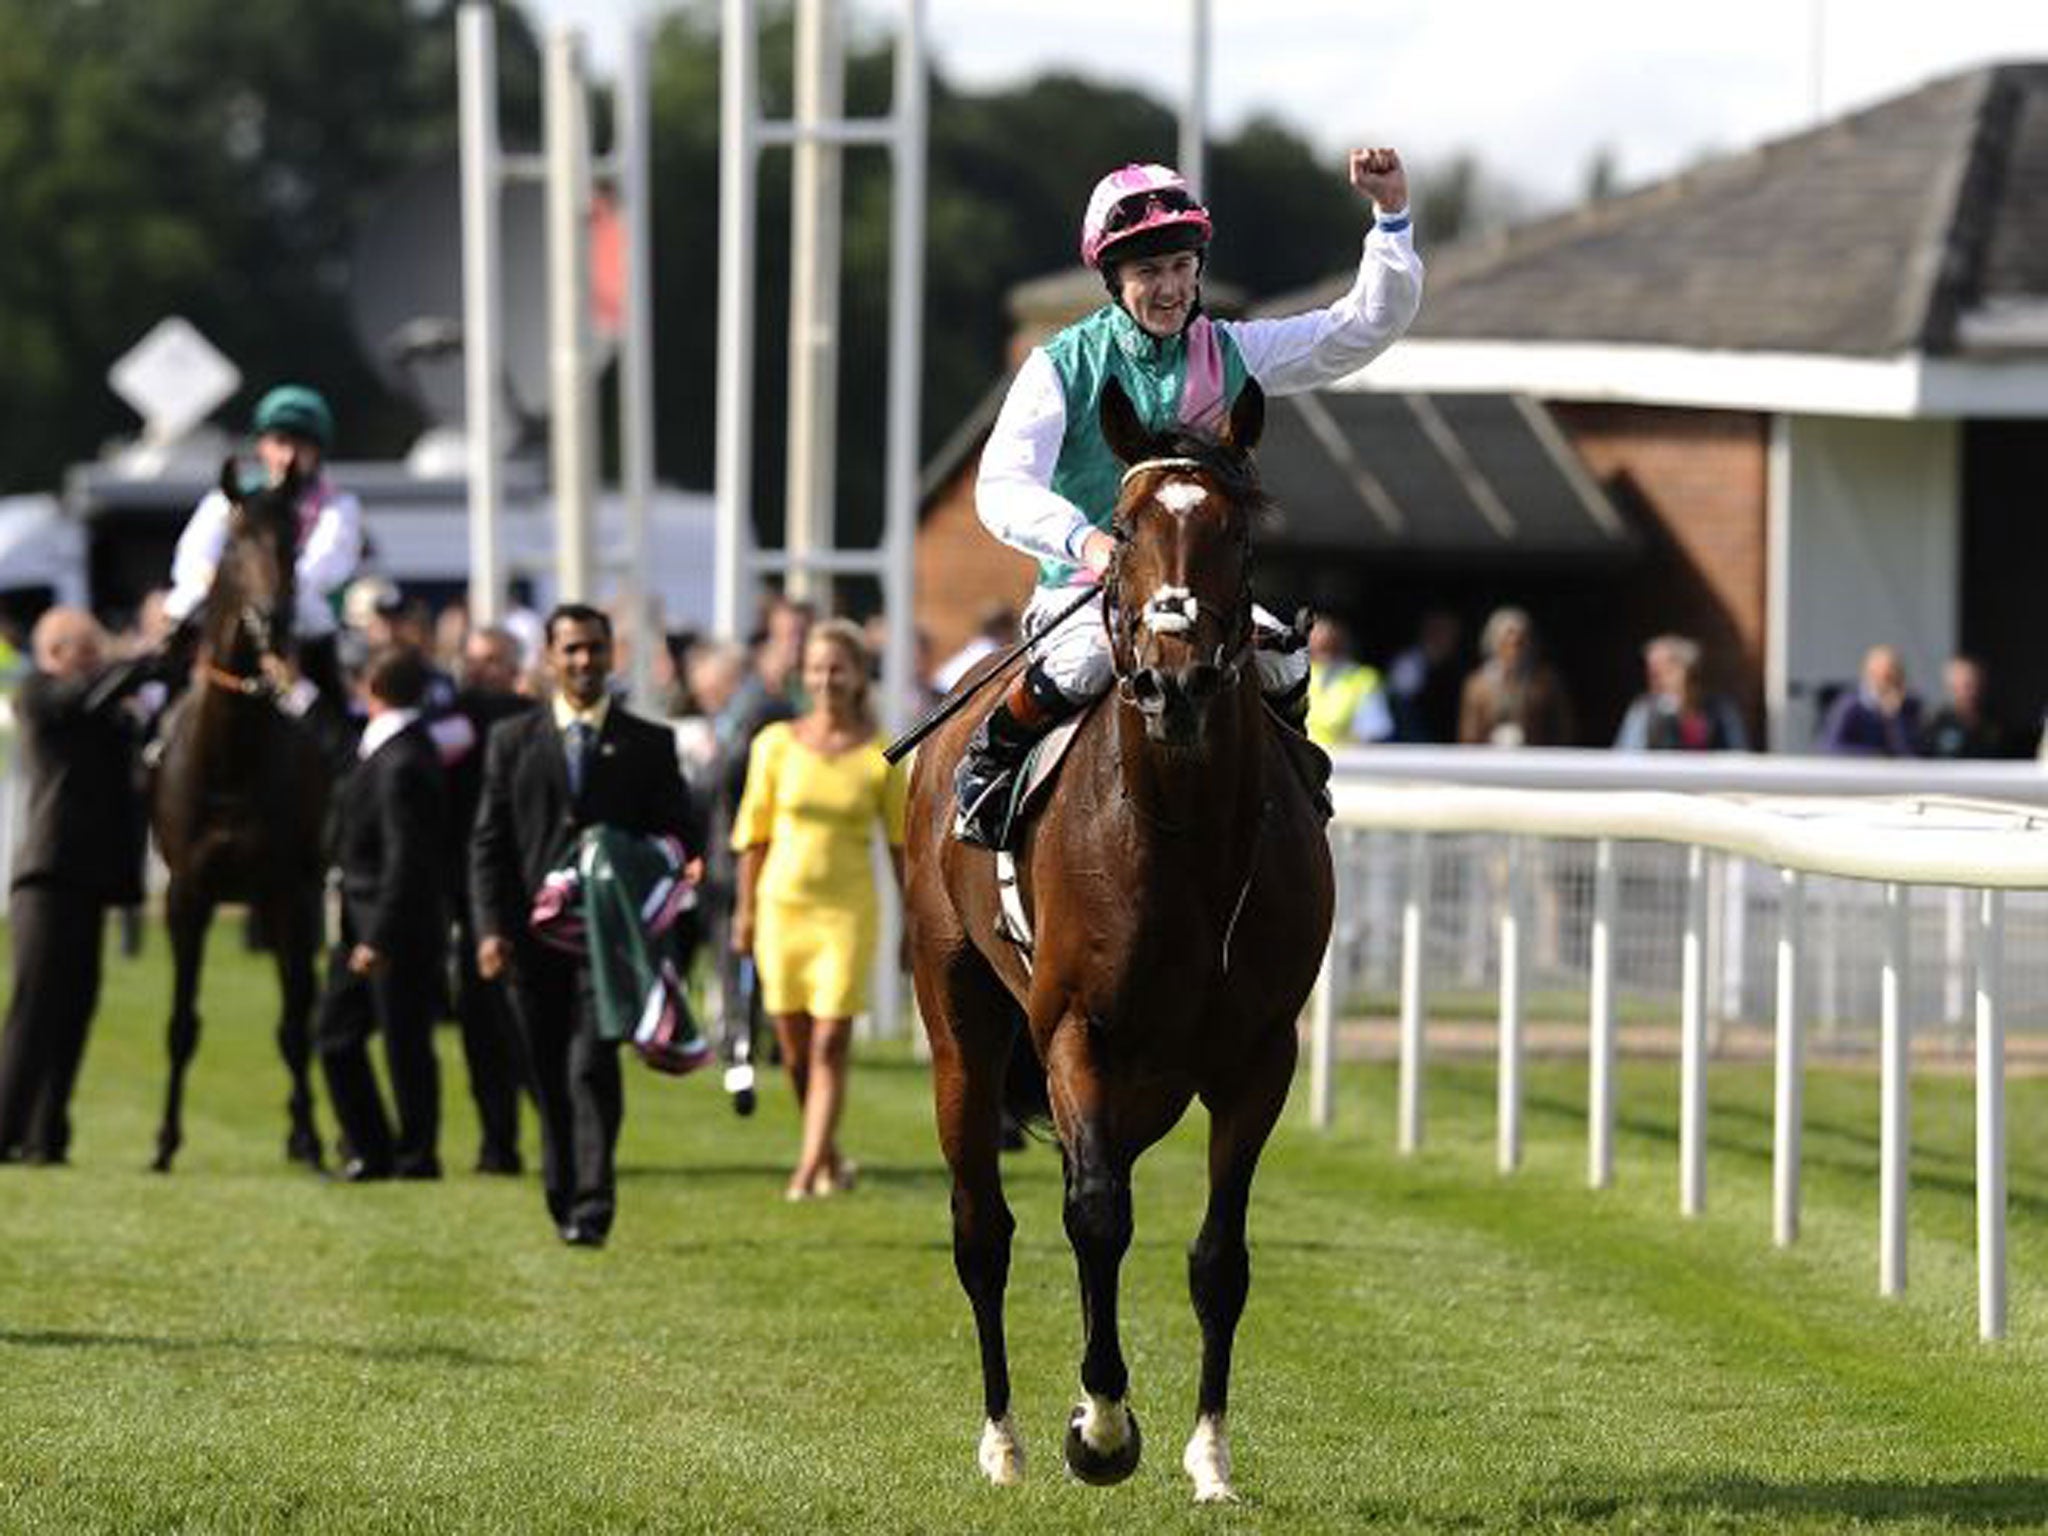 Frankel’s charisma had a redemptive quality, sealing the resurgence of his trainer